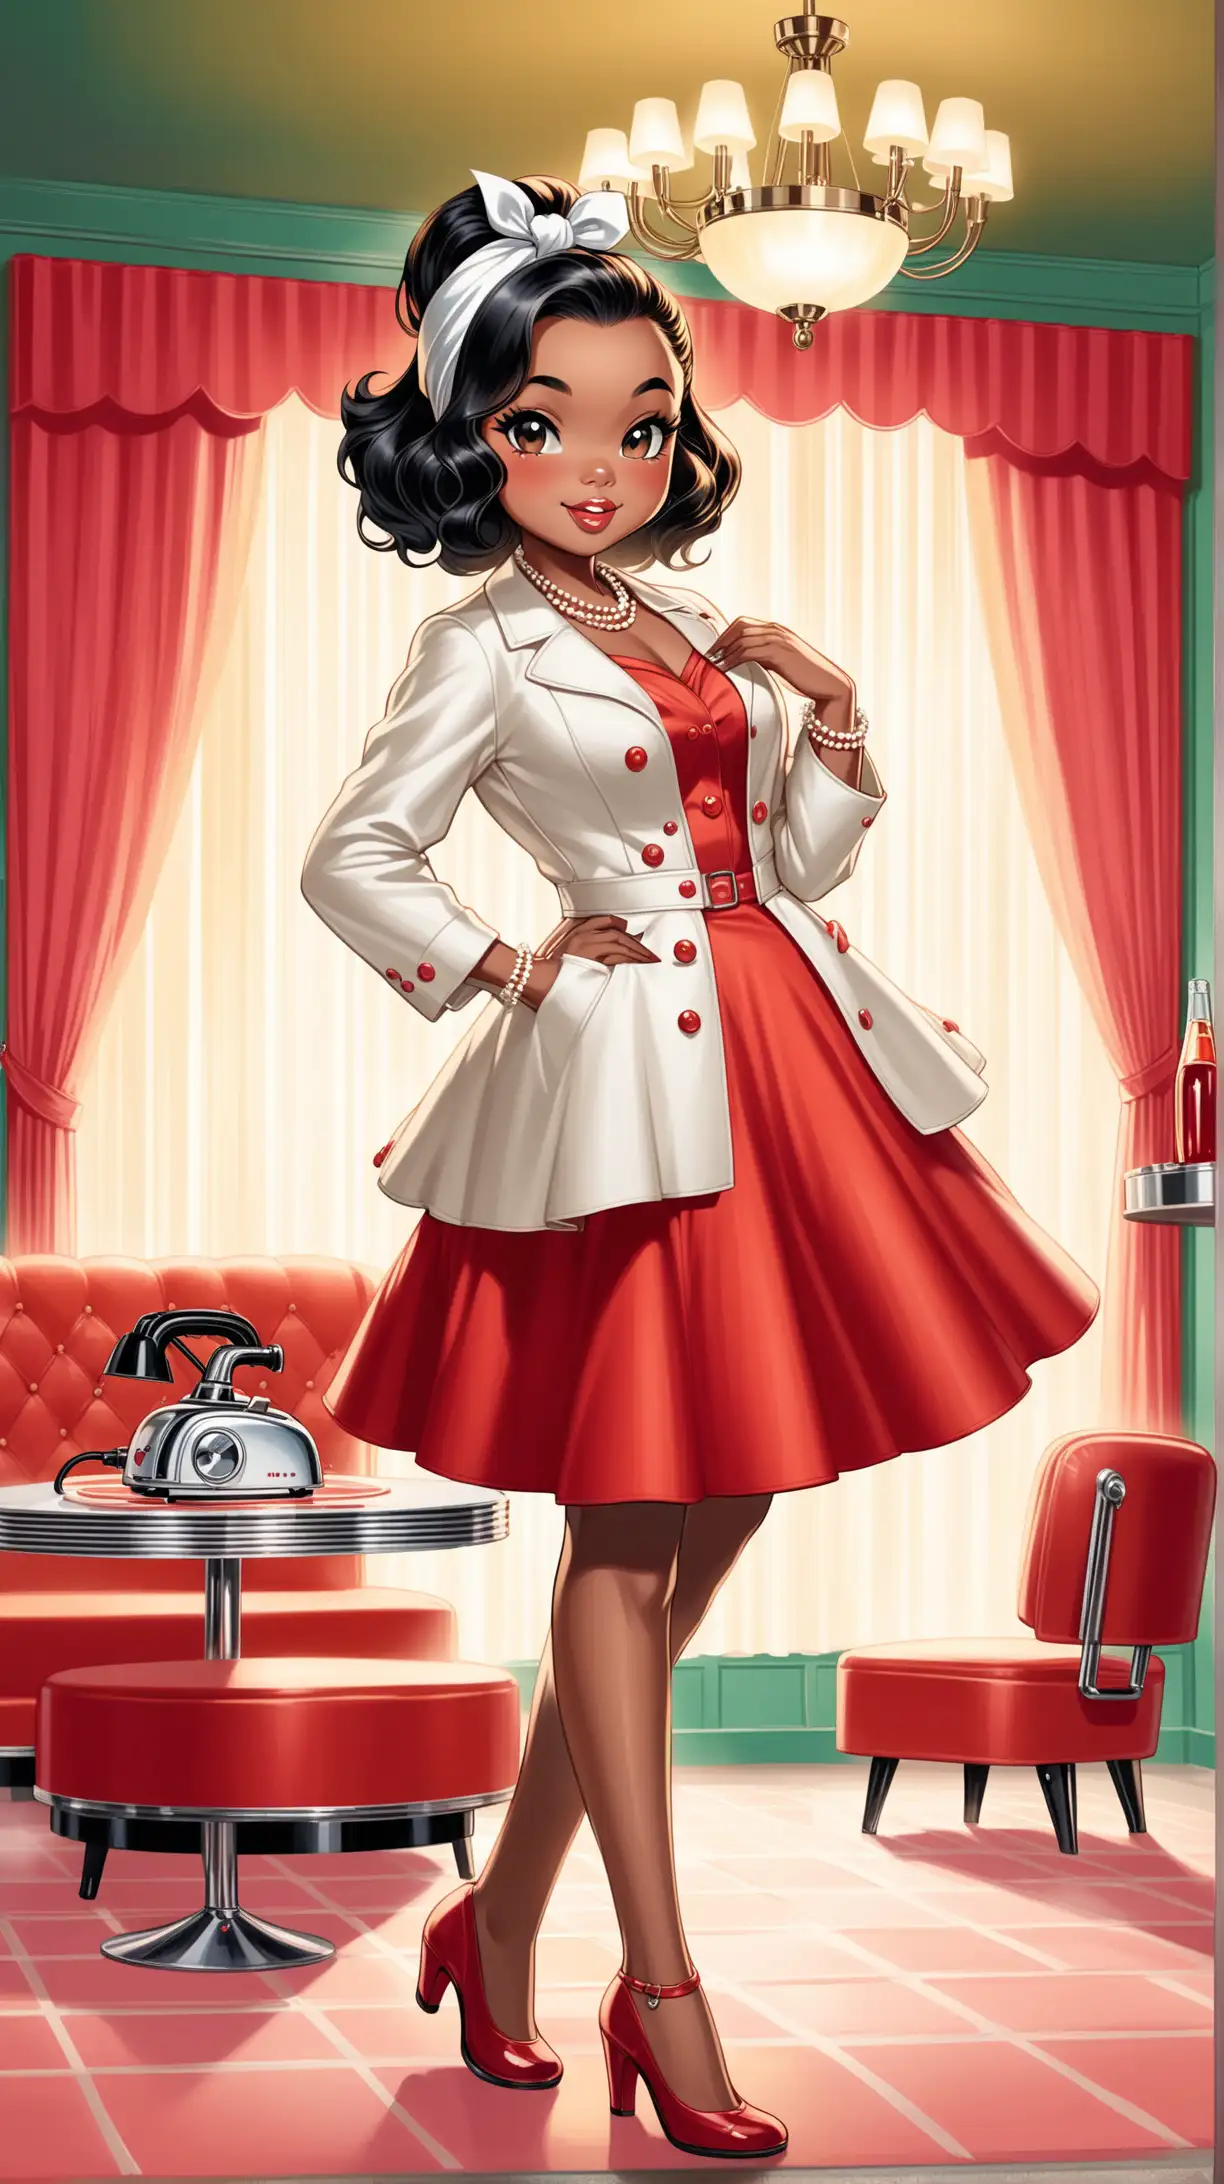 Create an image of a glamorous, chibi African American character with long, wavy, dark red hair tied with a white bandana, posing playfully in a 1950s-inspired diner. The character is dressed in a chic, form-fitting white suit featuring a peplum jacket adorned with black buttons. She playfully wields a 1950s vacuum cleaner, hinting at vacuuming a carpet within a luxurious 1950s living room. The living room is detailed with a floor model TV, a coral couch with matching curtains and pillows, creating a cohesive and vibrant mid-century ambiance. A grand chandelier illuminates the space, highlighting 1950s-style furniture, including a chrome cocktail table. A Shih Tzu dog adds a touch of warmth and companionship to the scene, enhancing the nostalgic and glamorous atmosphere. This digital A-line airbrush oil painting combines elements of fashion, interior design, and a playful narrative set in a bygone era, all while emphasizing the character's style and the detailed 1950s setting.